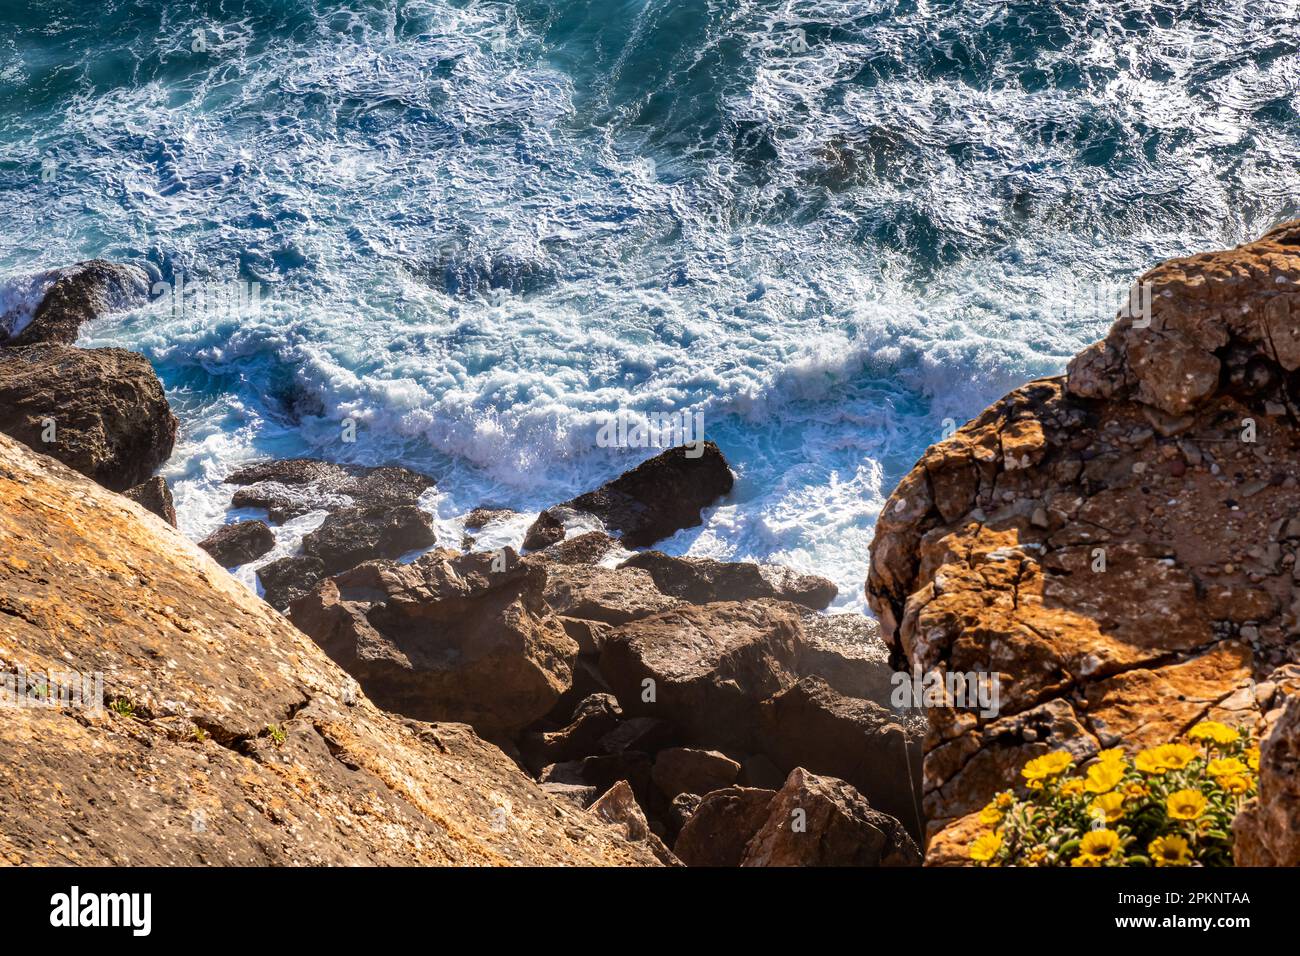 Waves crash against a rugged shoreline with dangerous force, creating hazardous swirls and flows in the waters below, with flowers adding color. Stock Photo